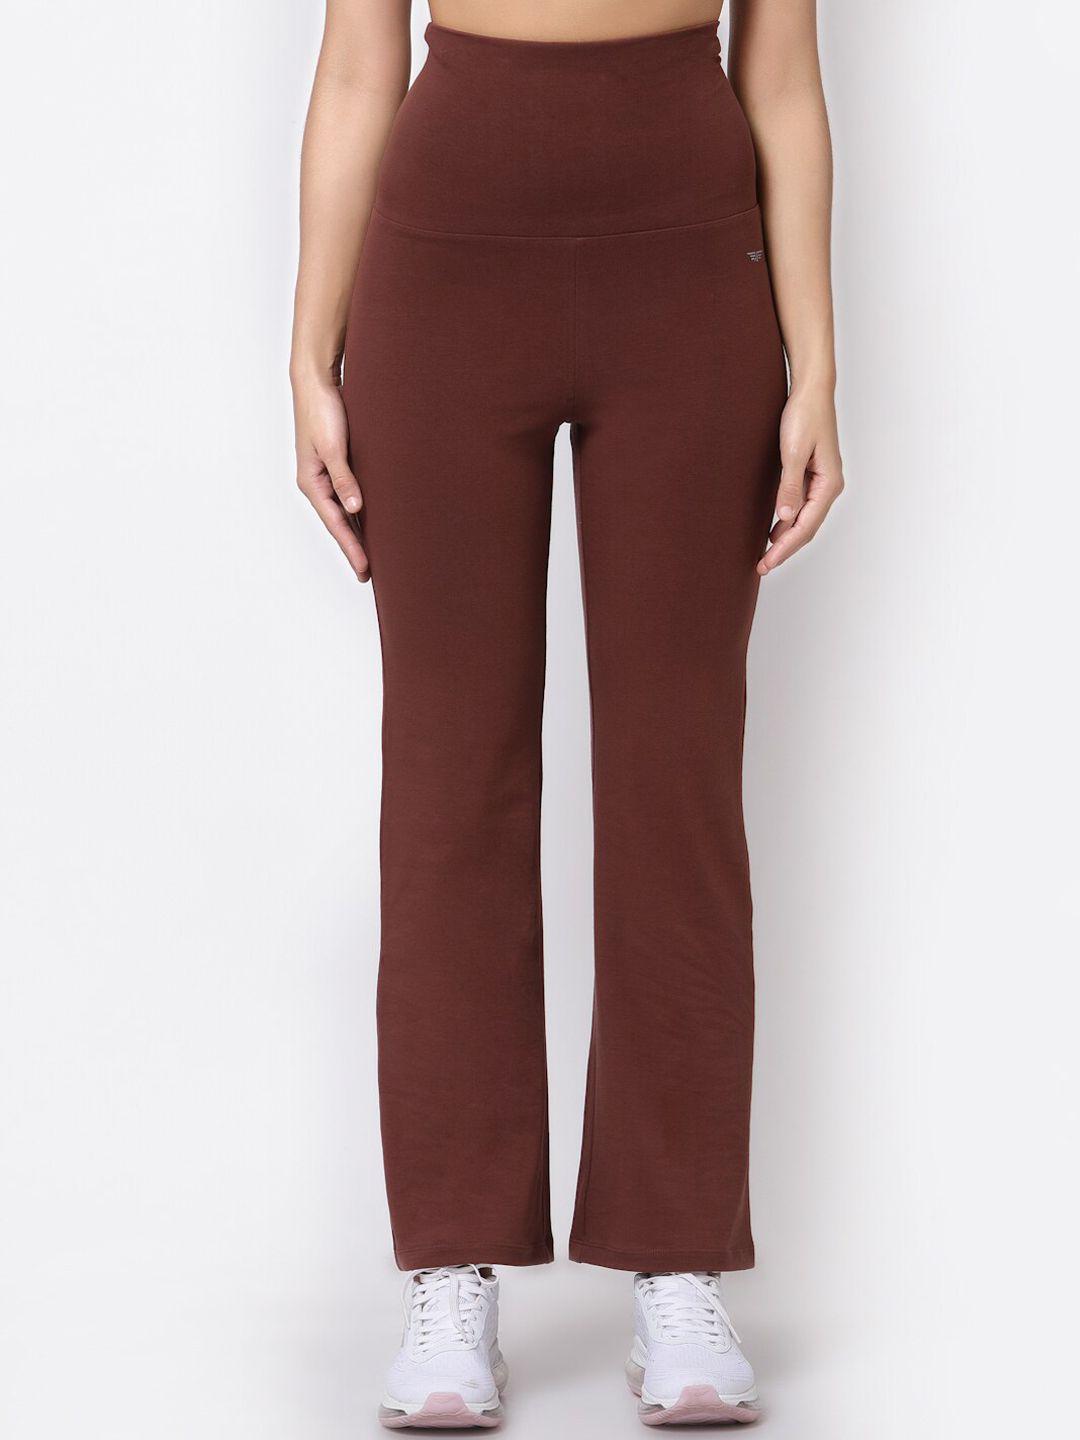 red-tape-women-brown-solid-yoga-track-pants